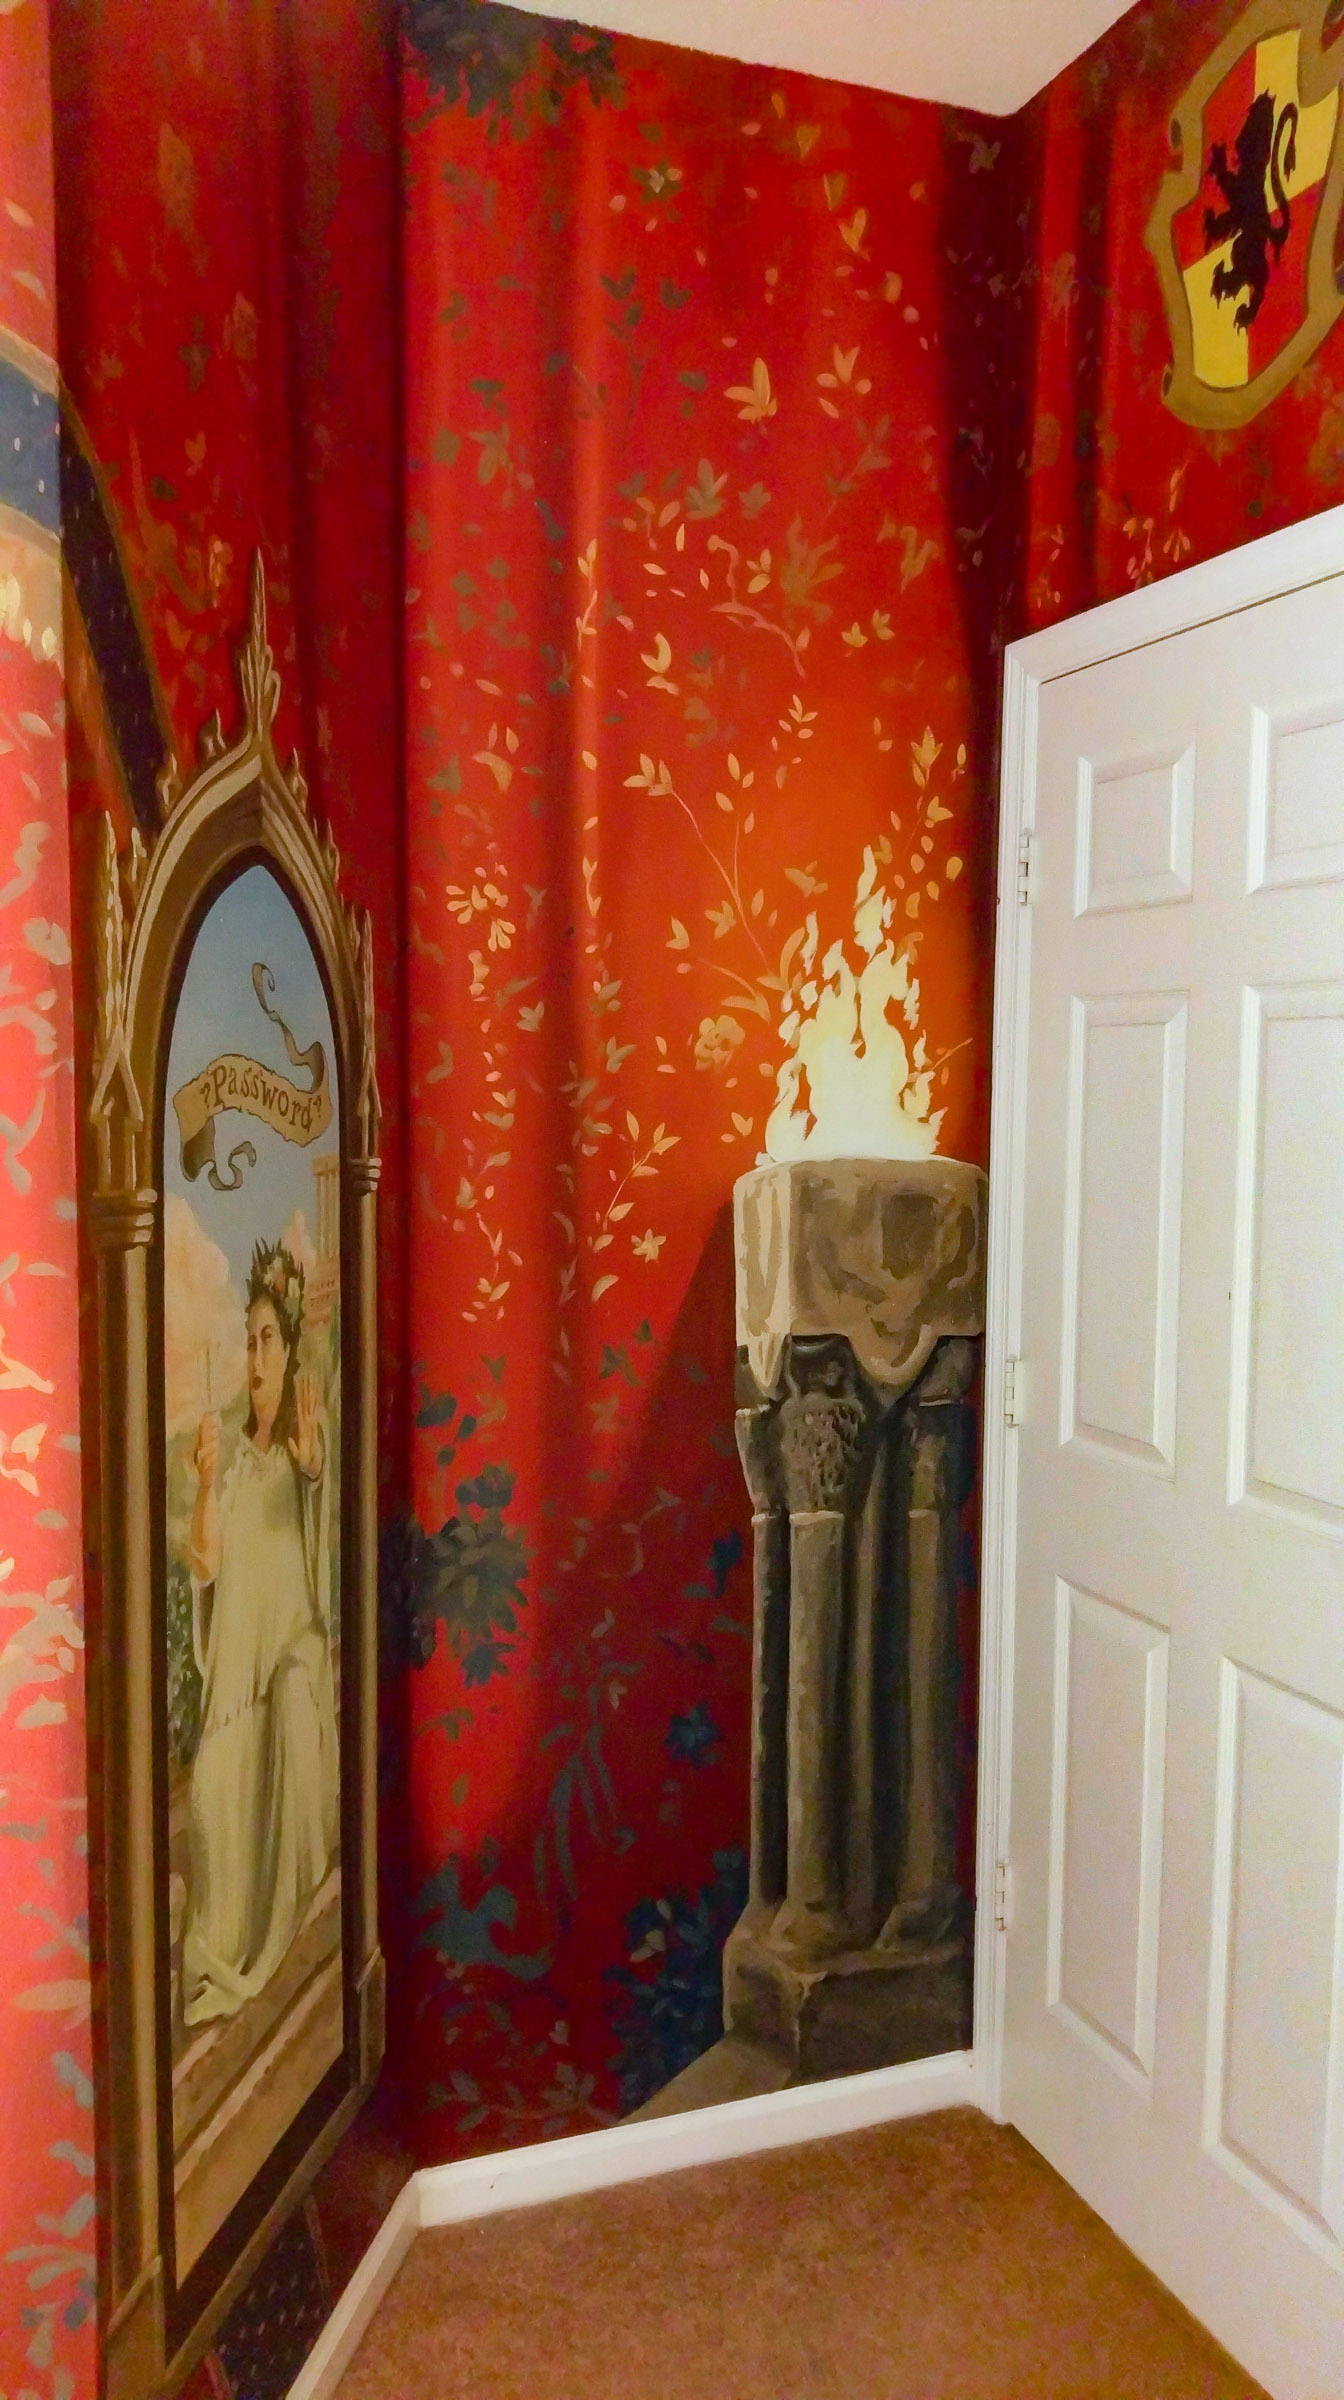 Harry Potter bedroom mural - Gryffindore Common Room entrance